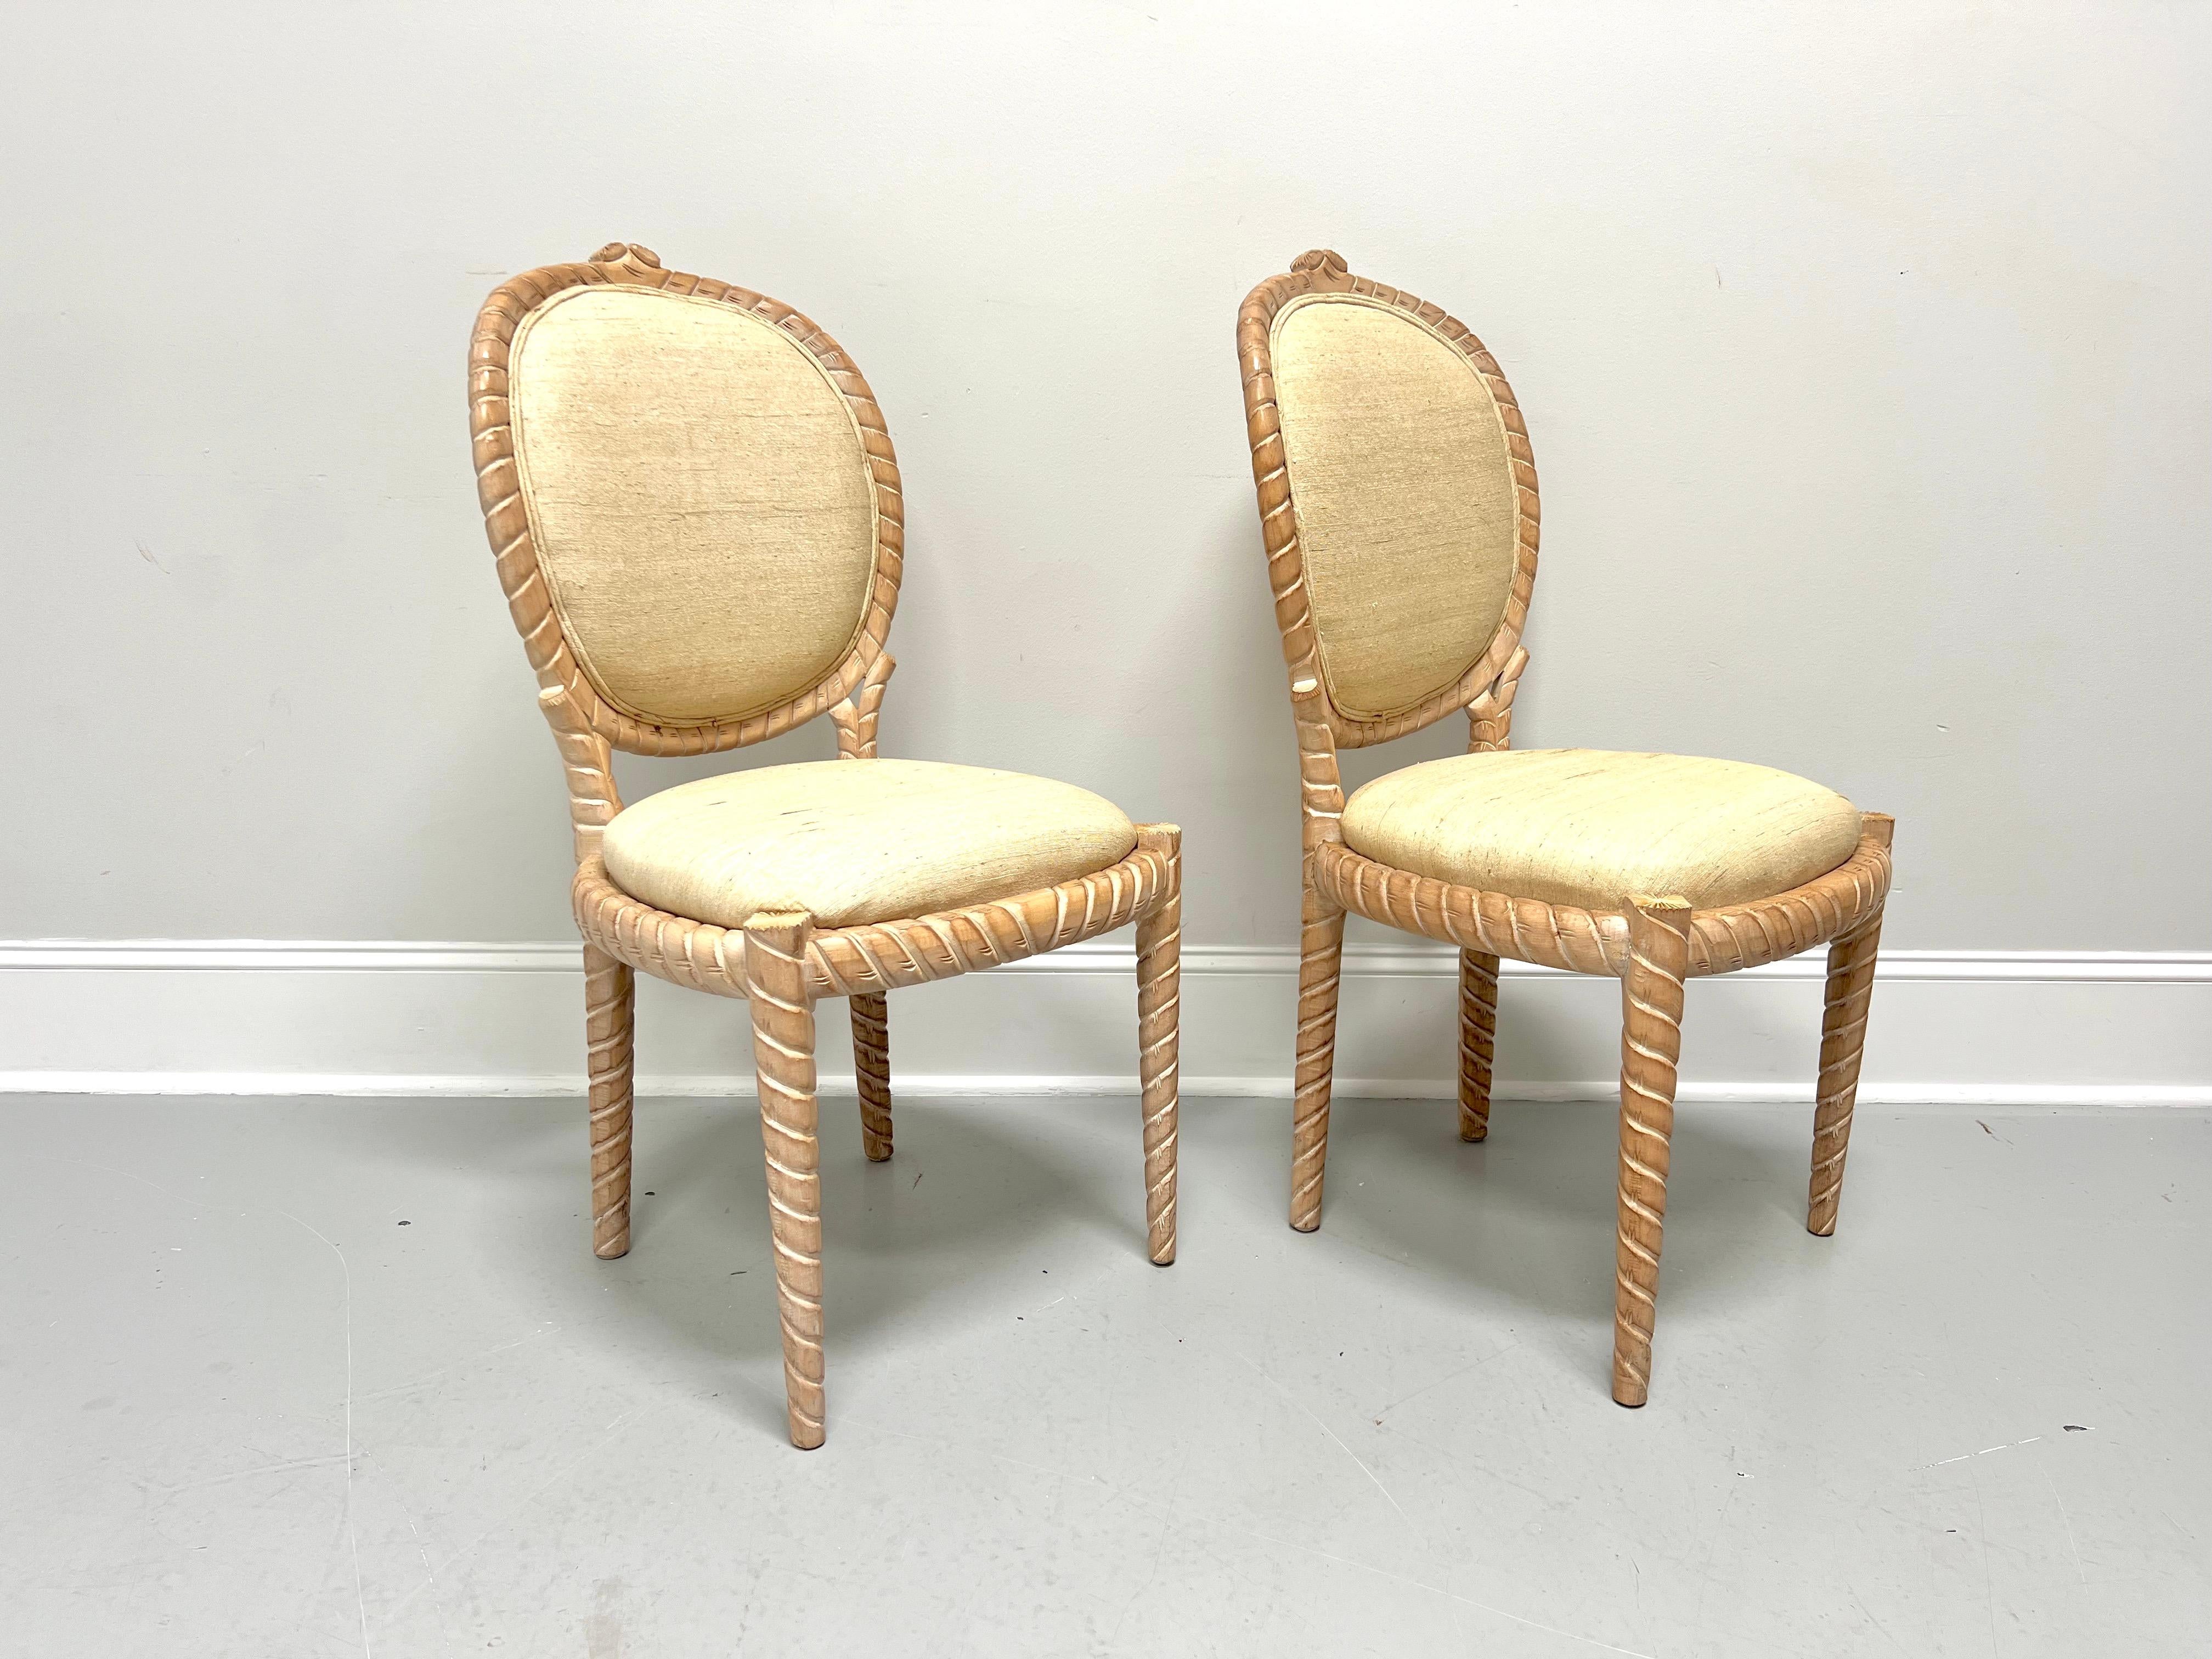 Bohemian 1980's Carved Whitewashed Wood Boho Rope Twist Dining Side Chairs - Pair A For Sale